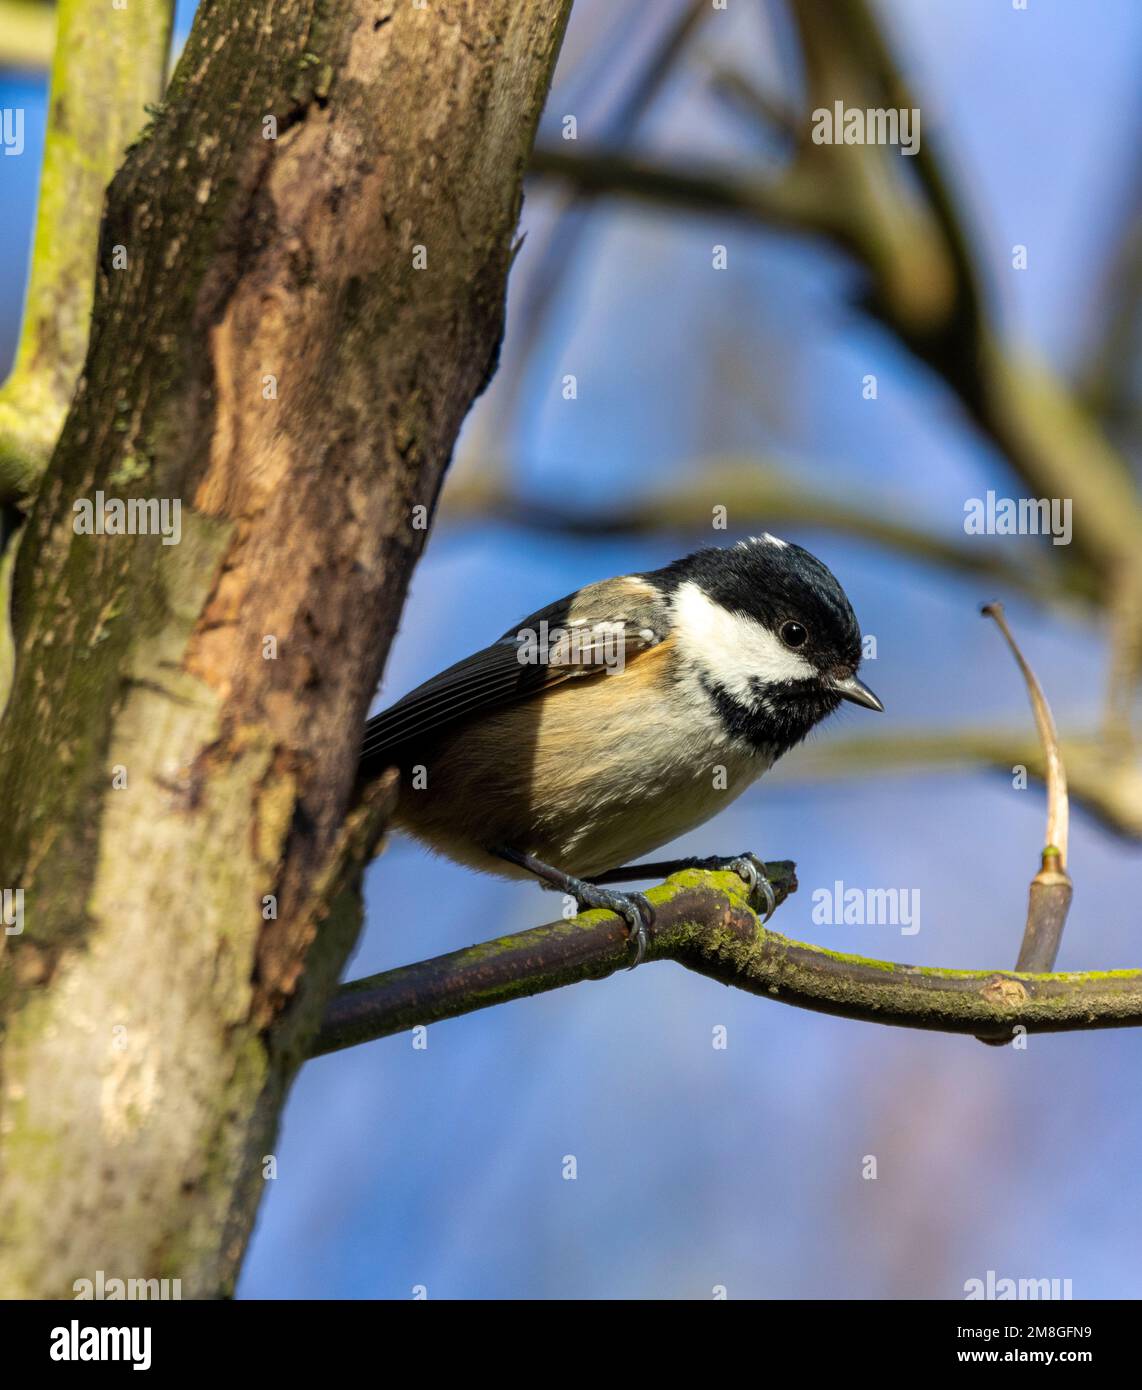 The white on the nape of the neck distinguishes the Coal Tit from 2 other similar species in the family. A small active bird often found in gardens. Stock Photo